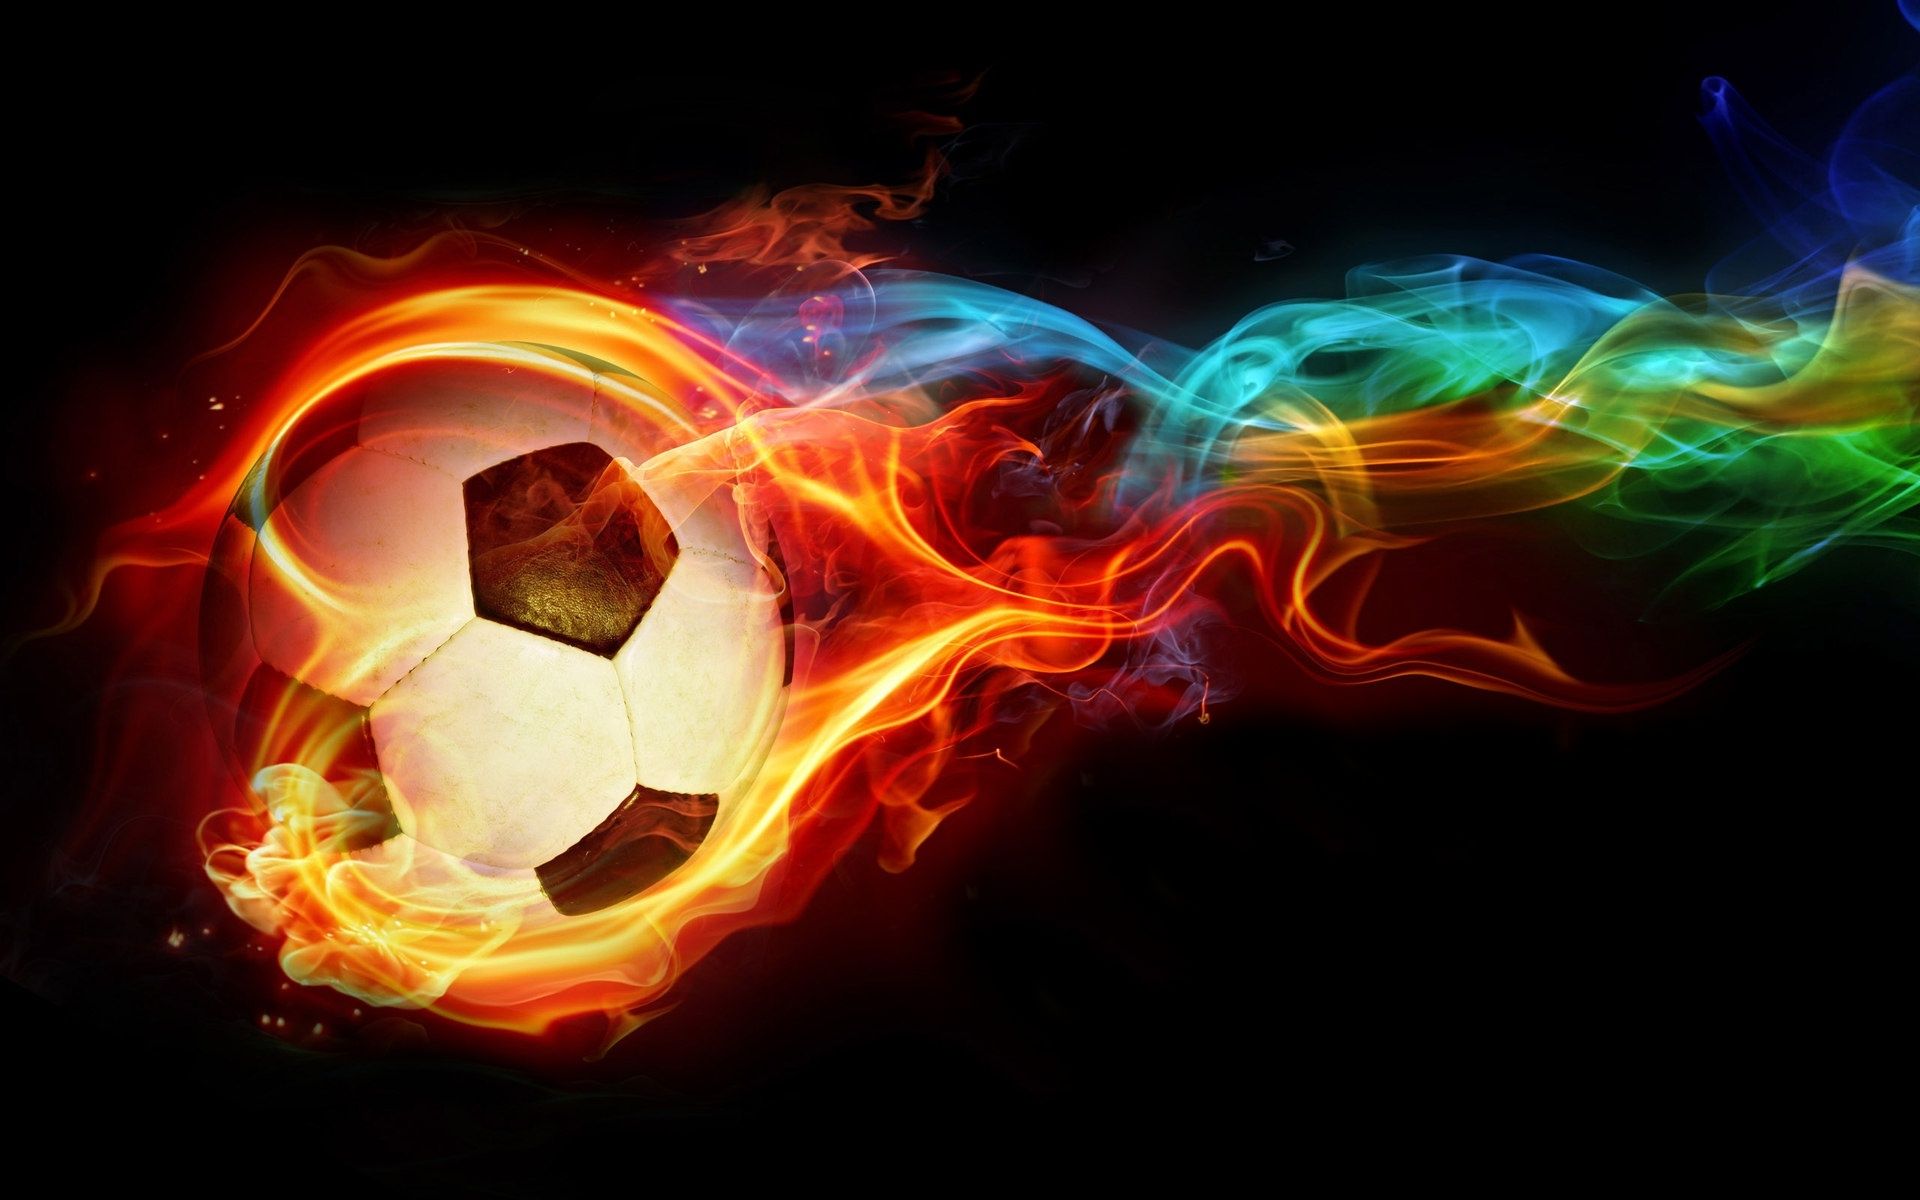 Football with Fire Flames | Photo and Desktop Wallpaper